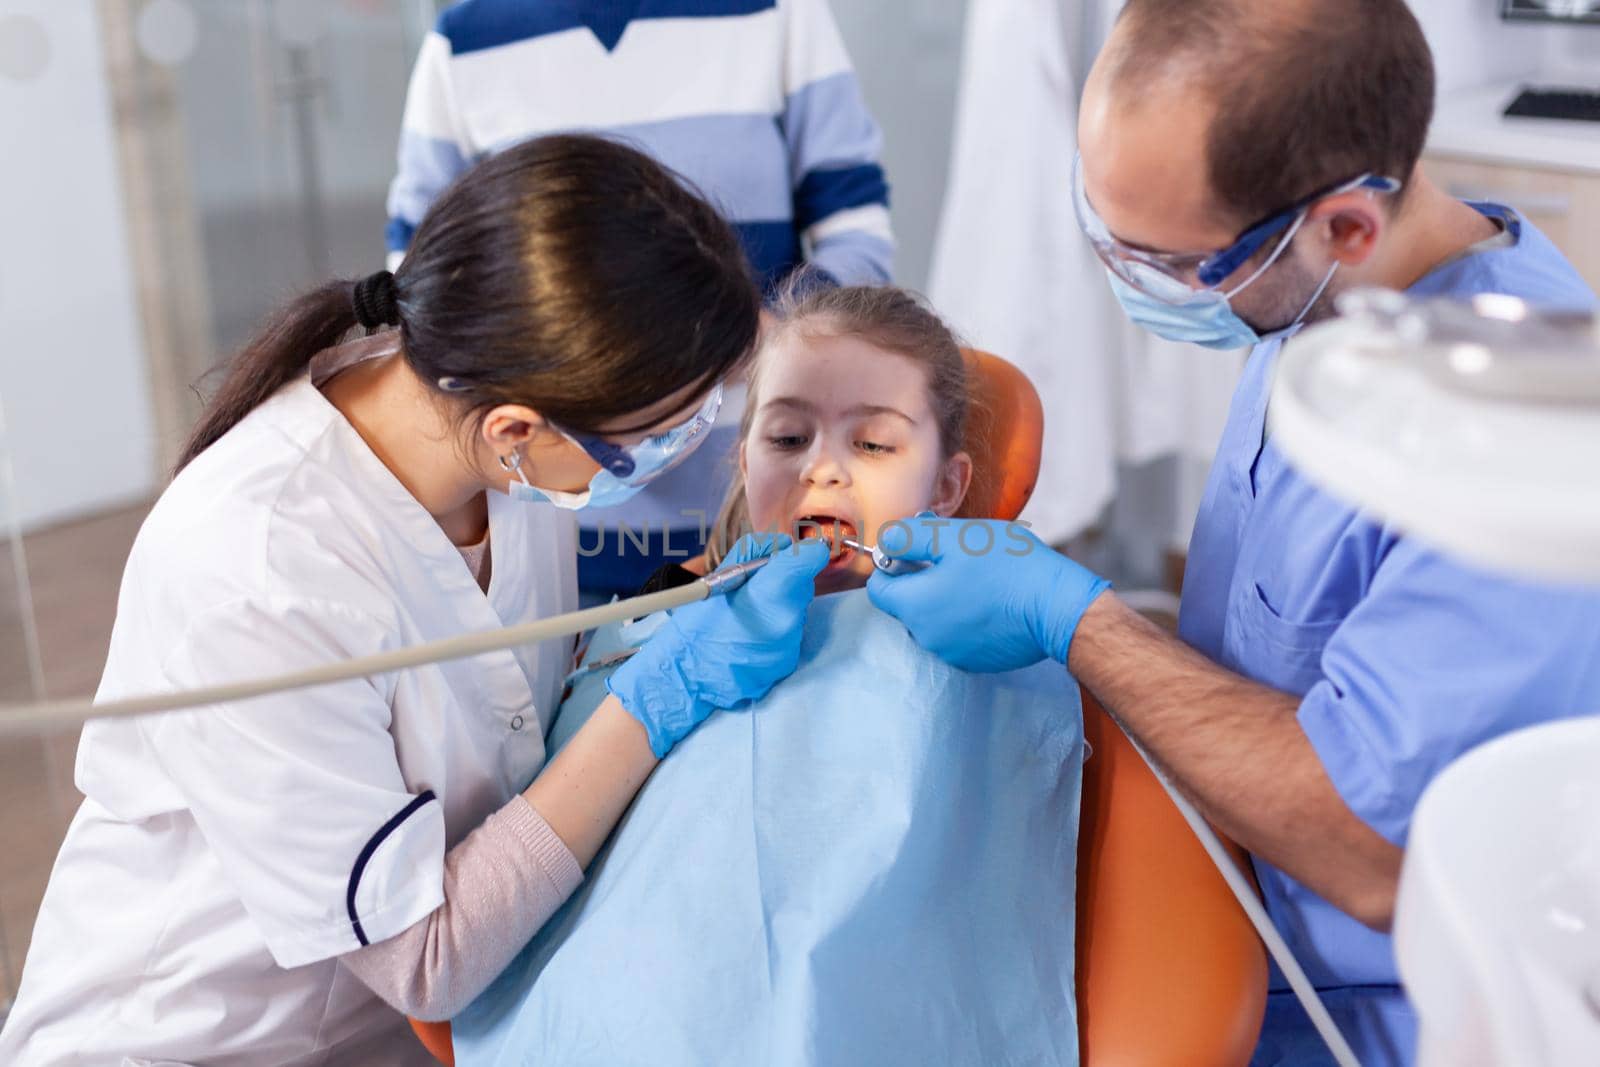 Little girl with mouth open in the course of cavity treatment by DCStudio